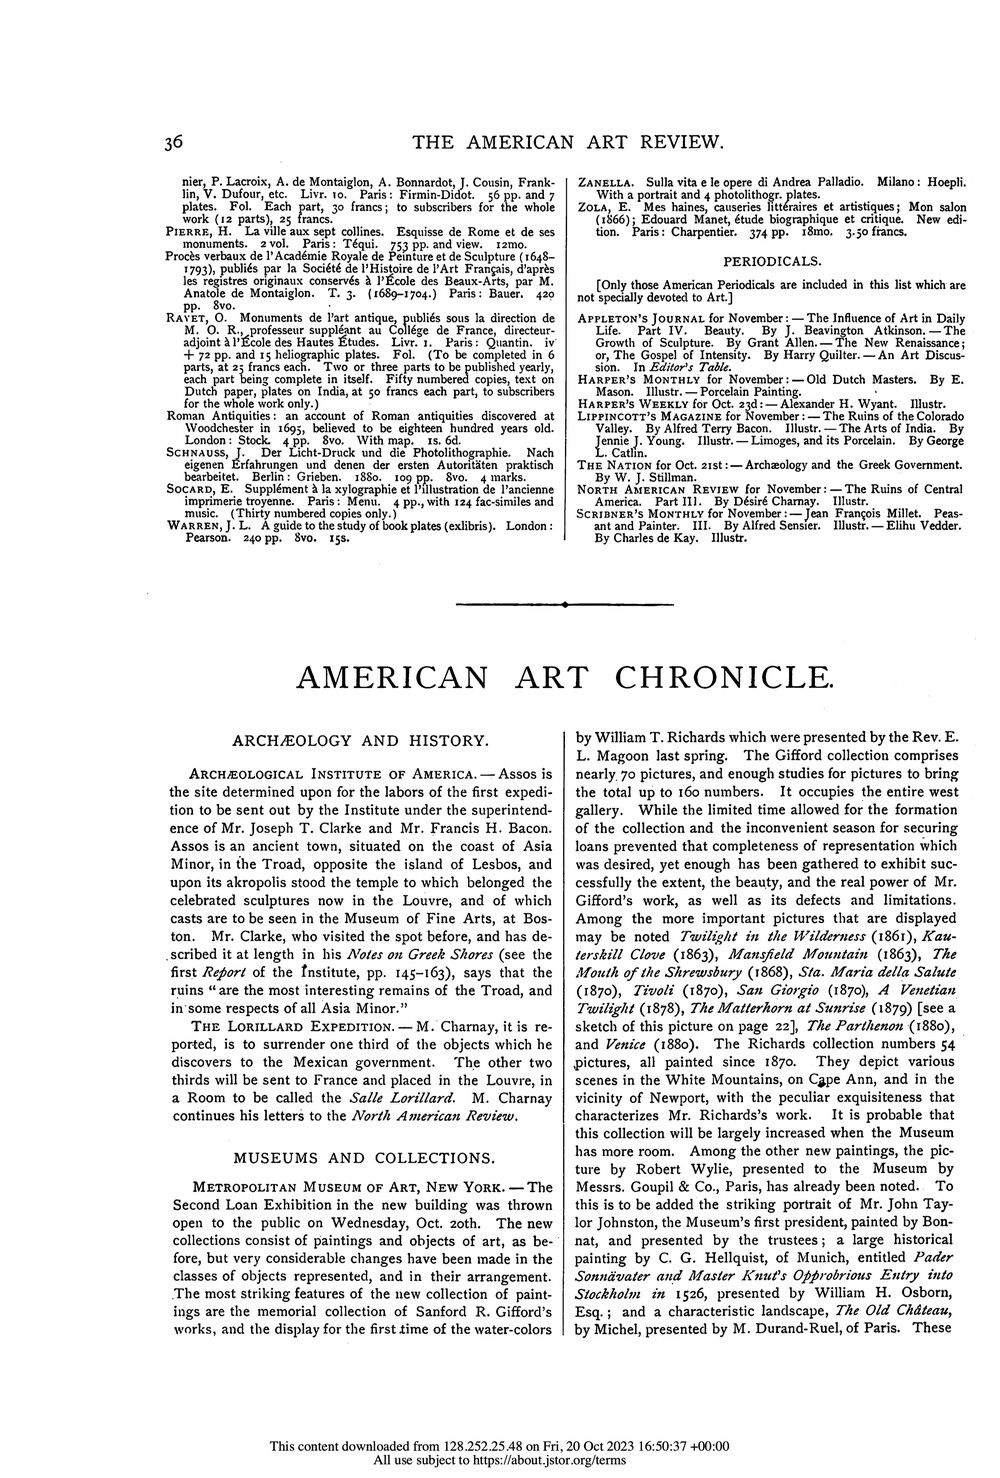 The first page of "American Art Chronicle"